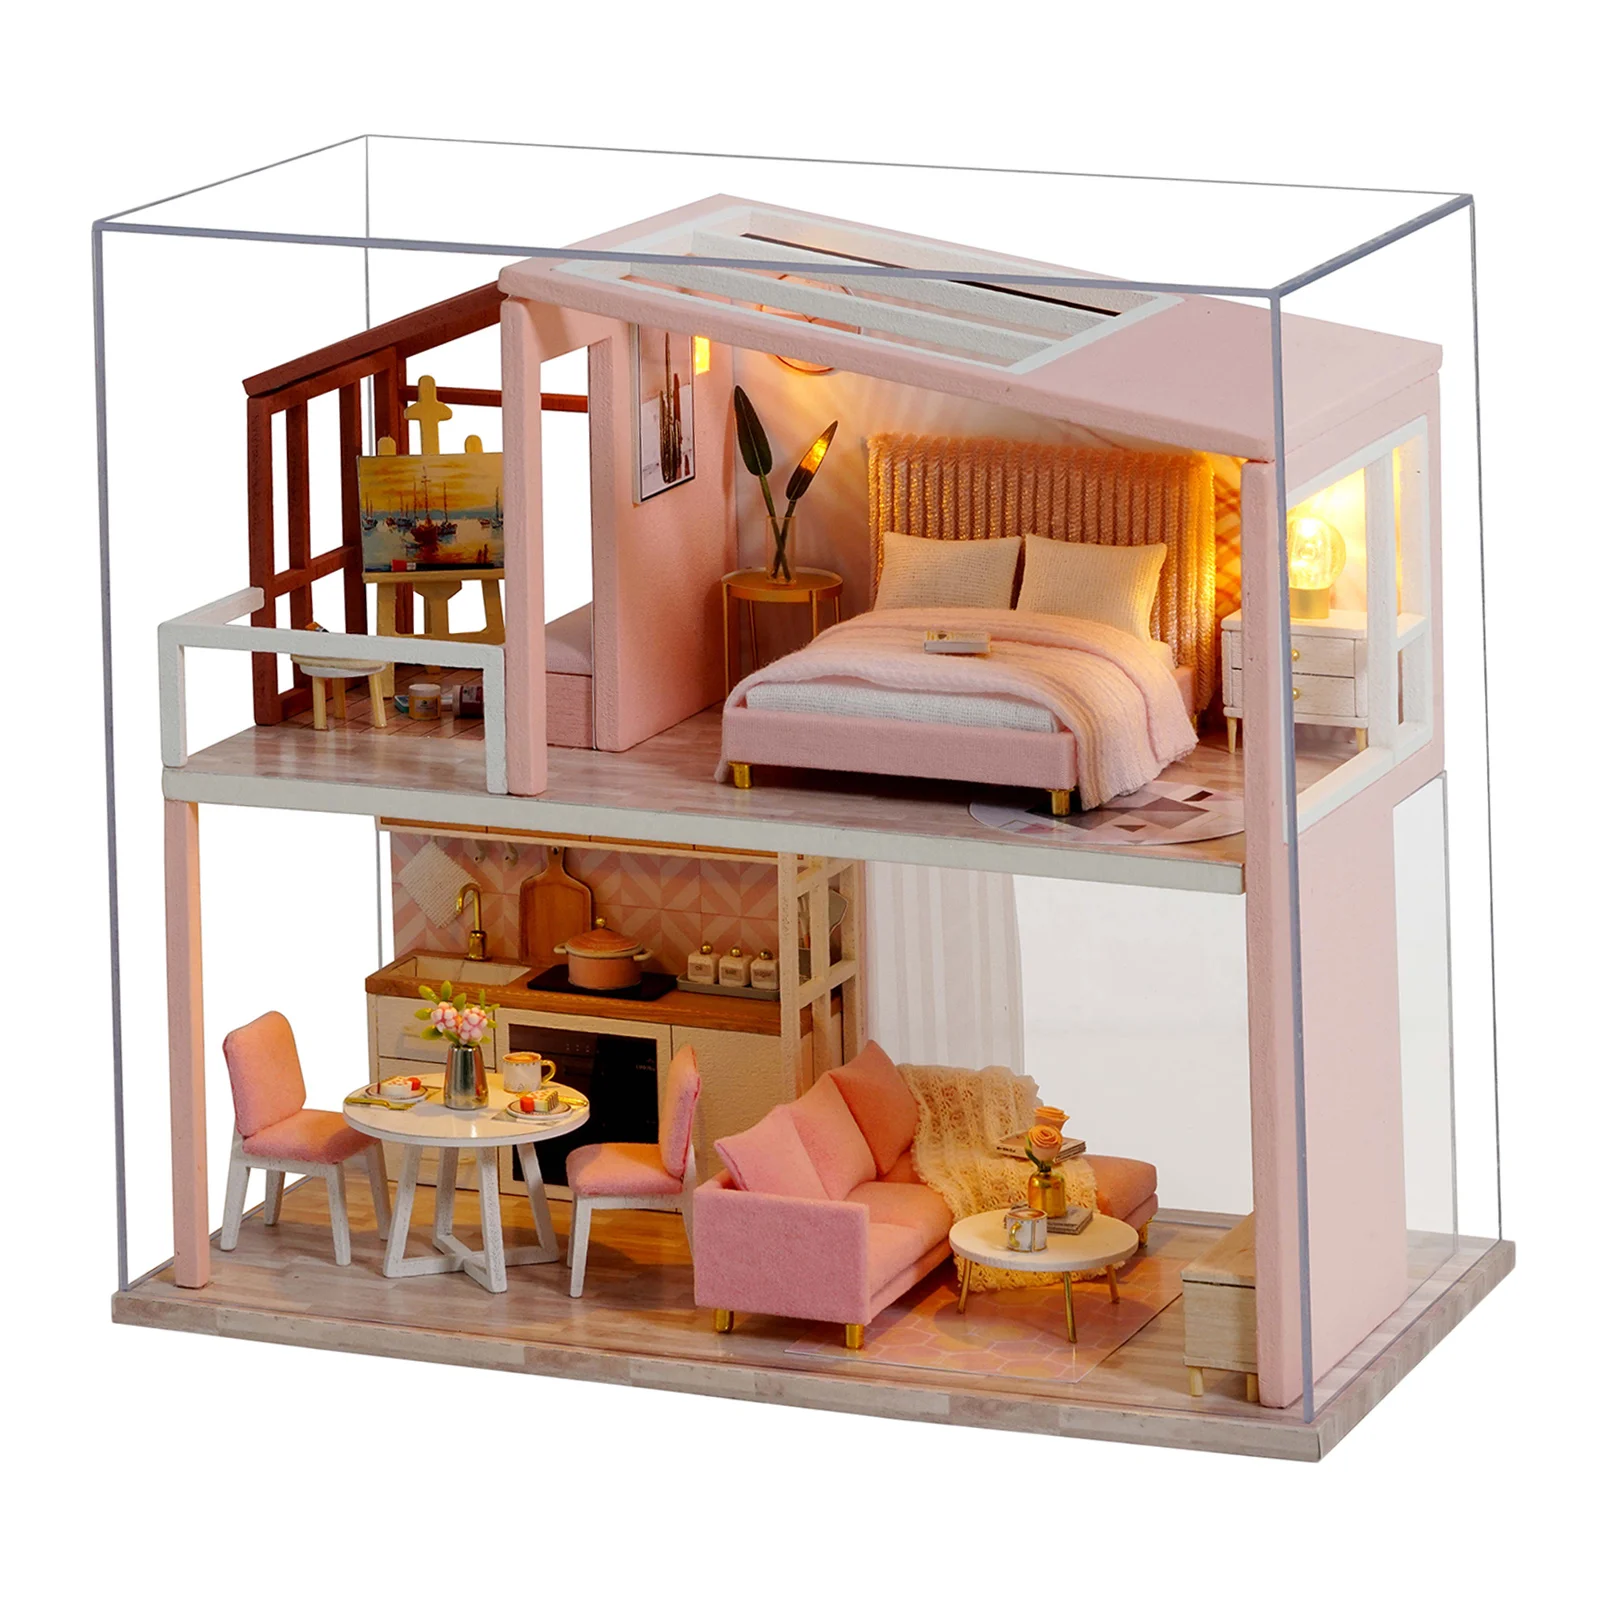 1:24 Doll House DIY Miniature with Furniture Assemble Dollhouse Kit